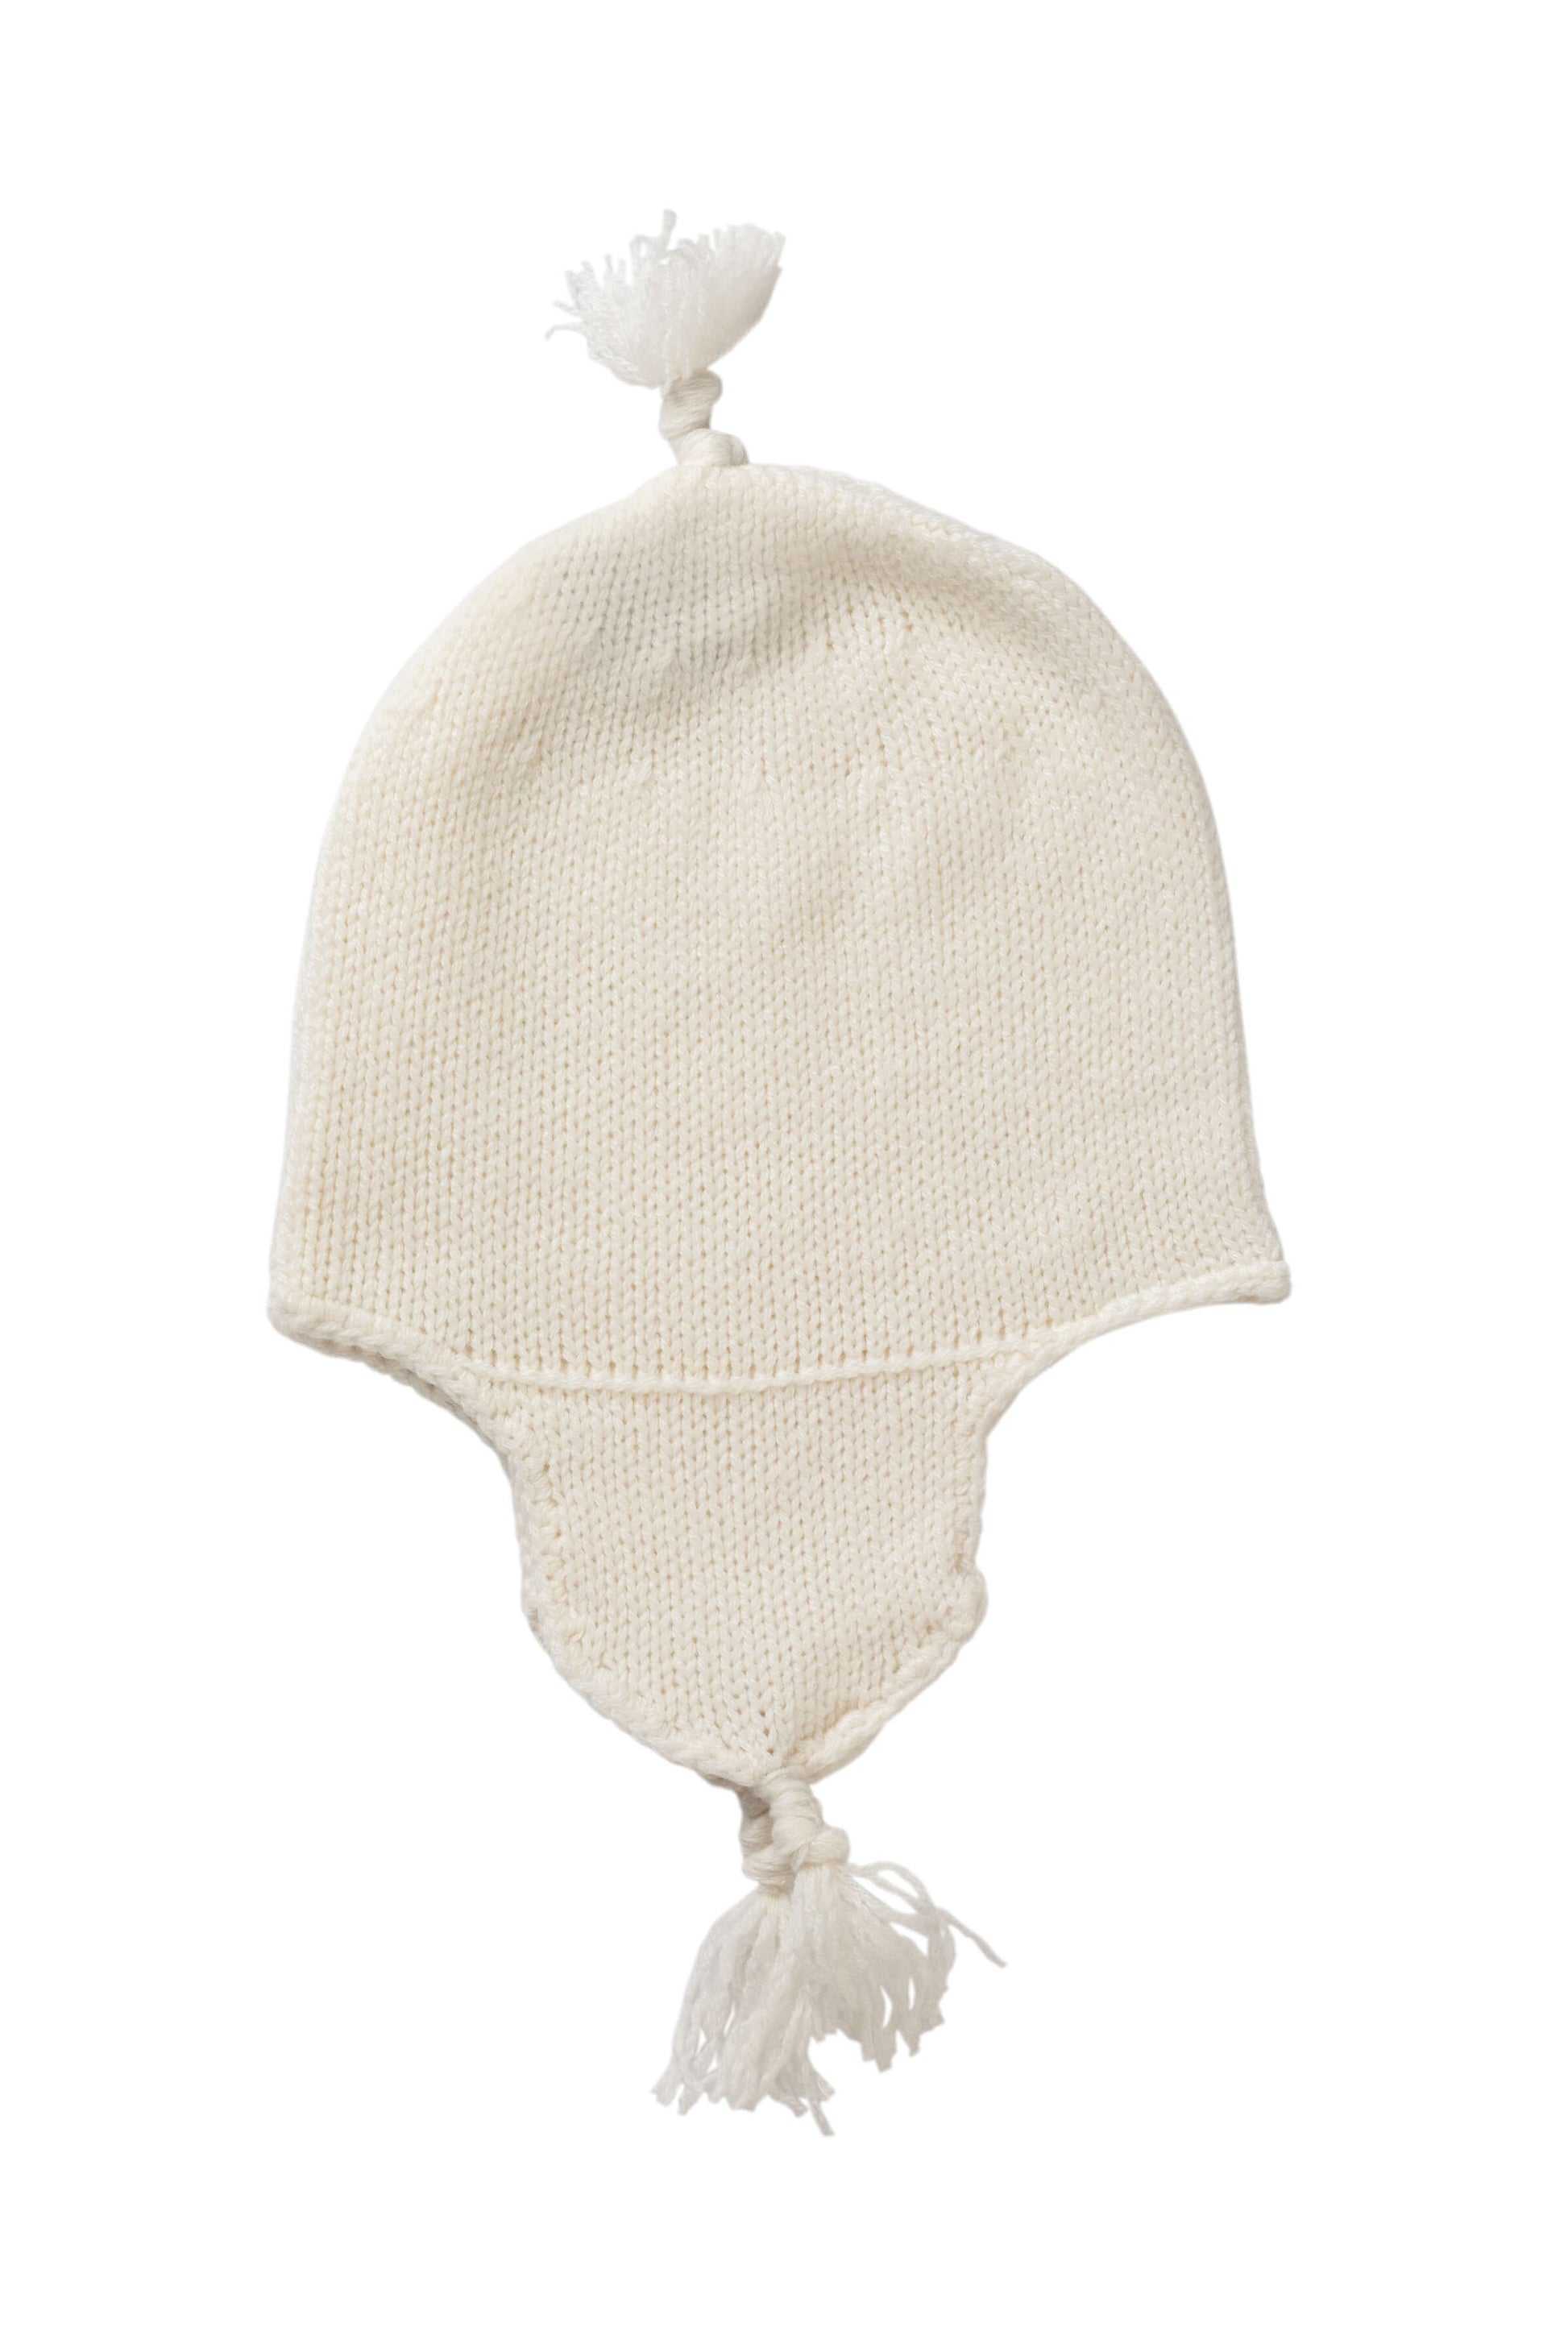 Johnstons of Elgin Baby Handknits Ecru Cashmere Baby Hat with Tassel 79010SA0132ONE